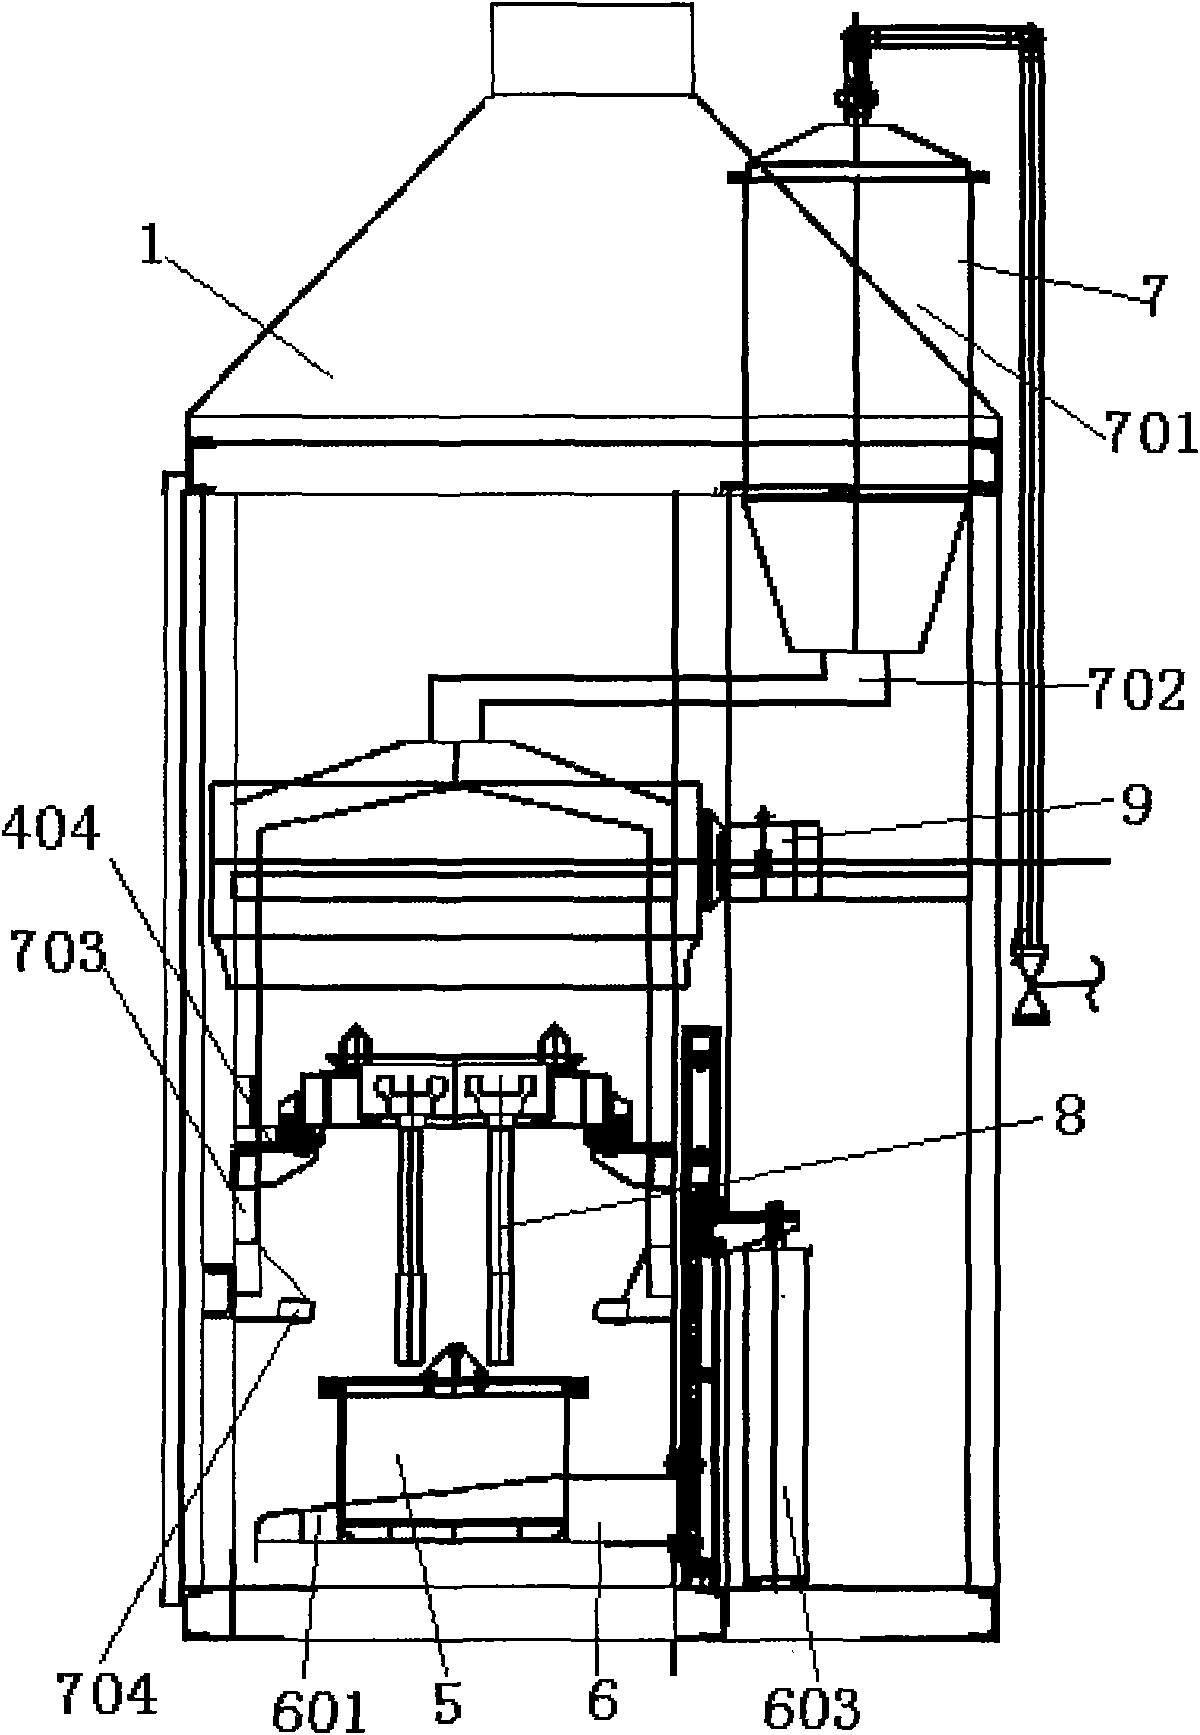 Automatic primer dipping and coating mechanism for plastic-coated spline shaft without sagging